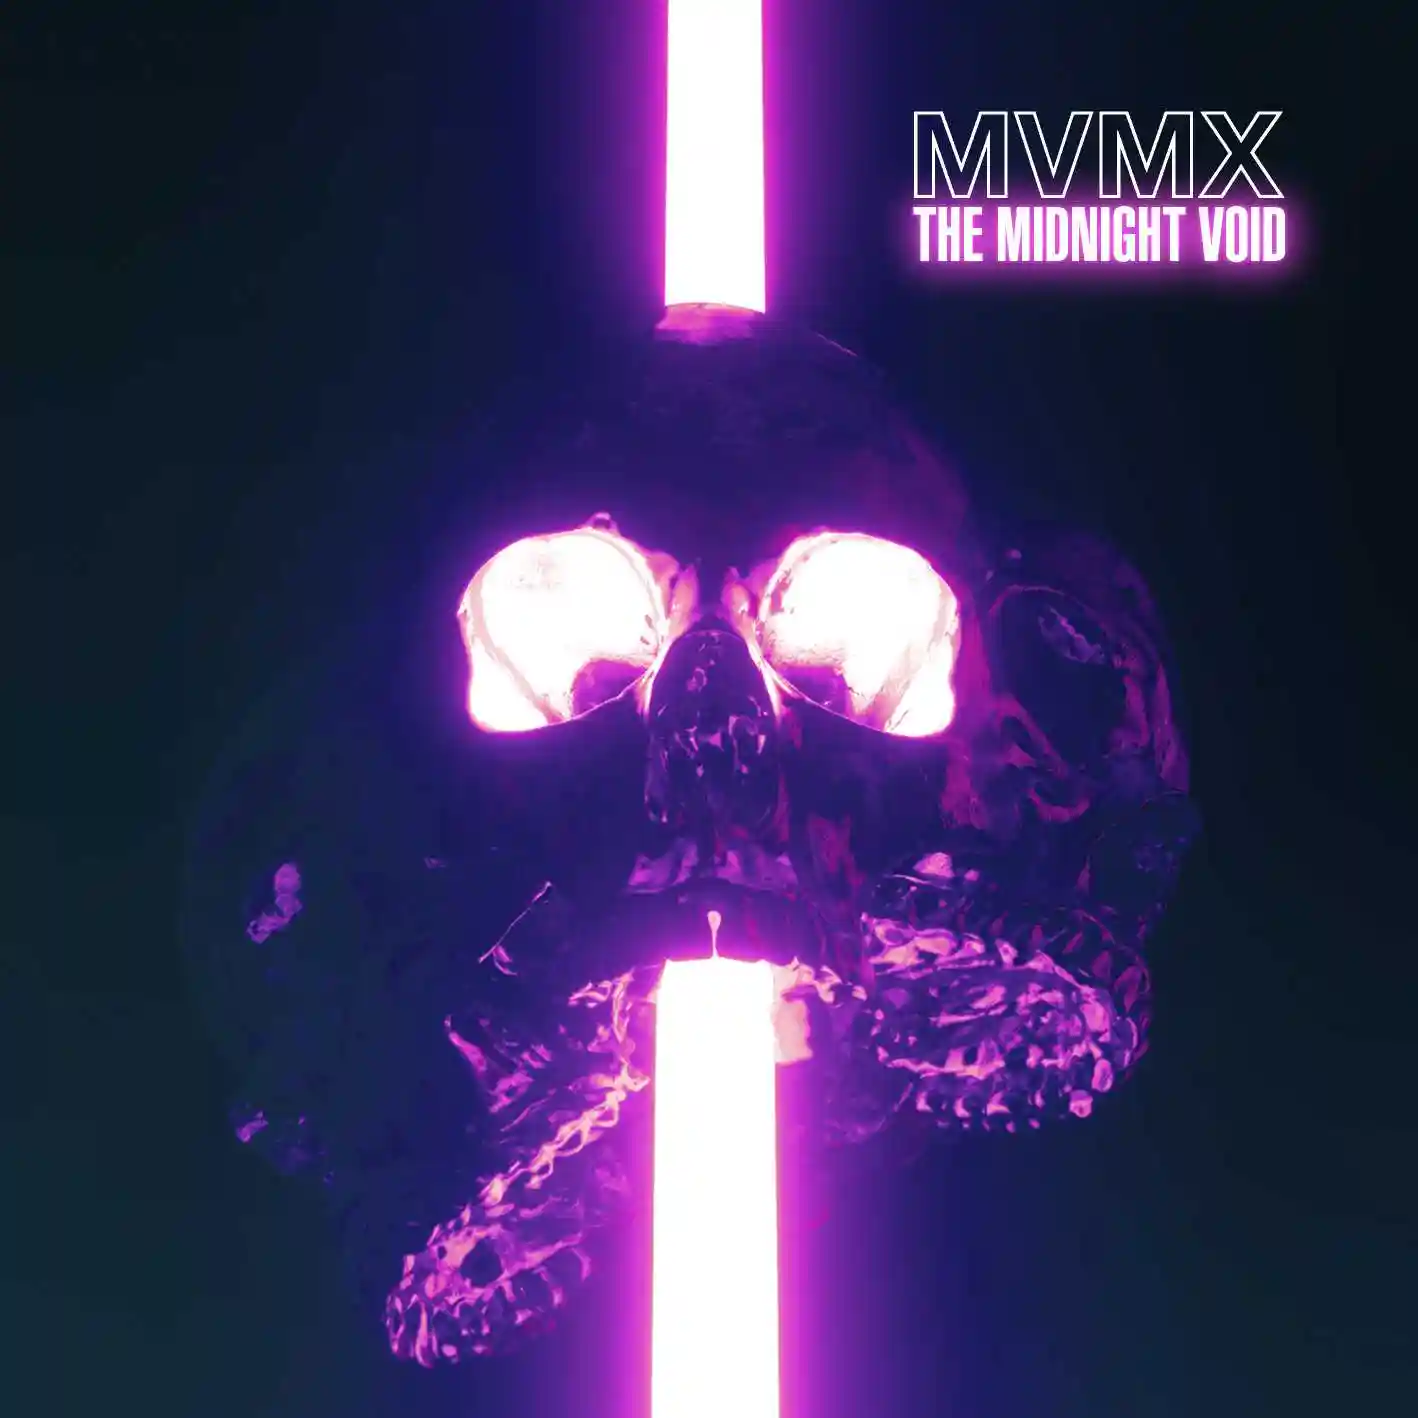 Album cover for “The Midnight Void” by MVMX